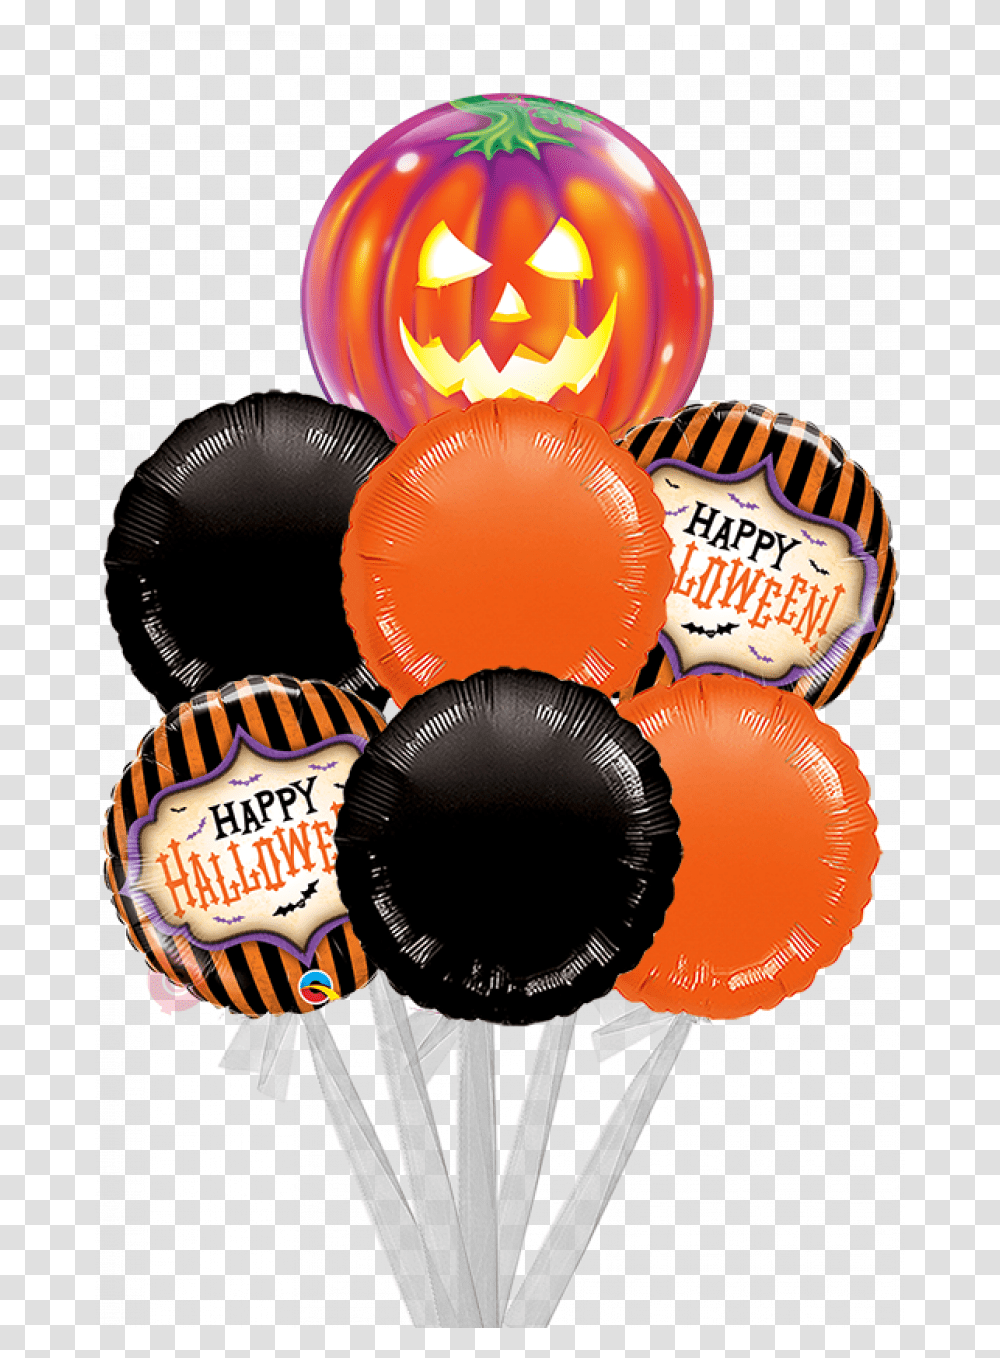 Happy Halloween Spooky Bats Bigger Bouquet 7 Balloons Halloween Balloons, Lamp, Microphone, Electrical Device Transparent Png